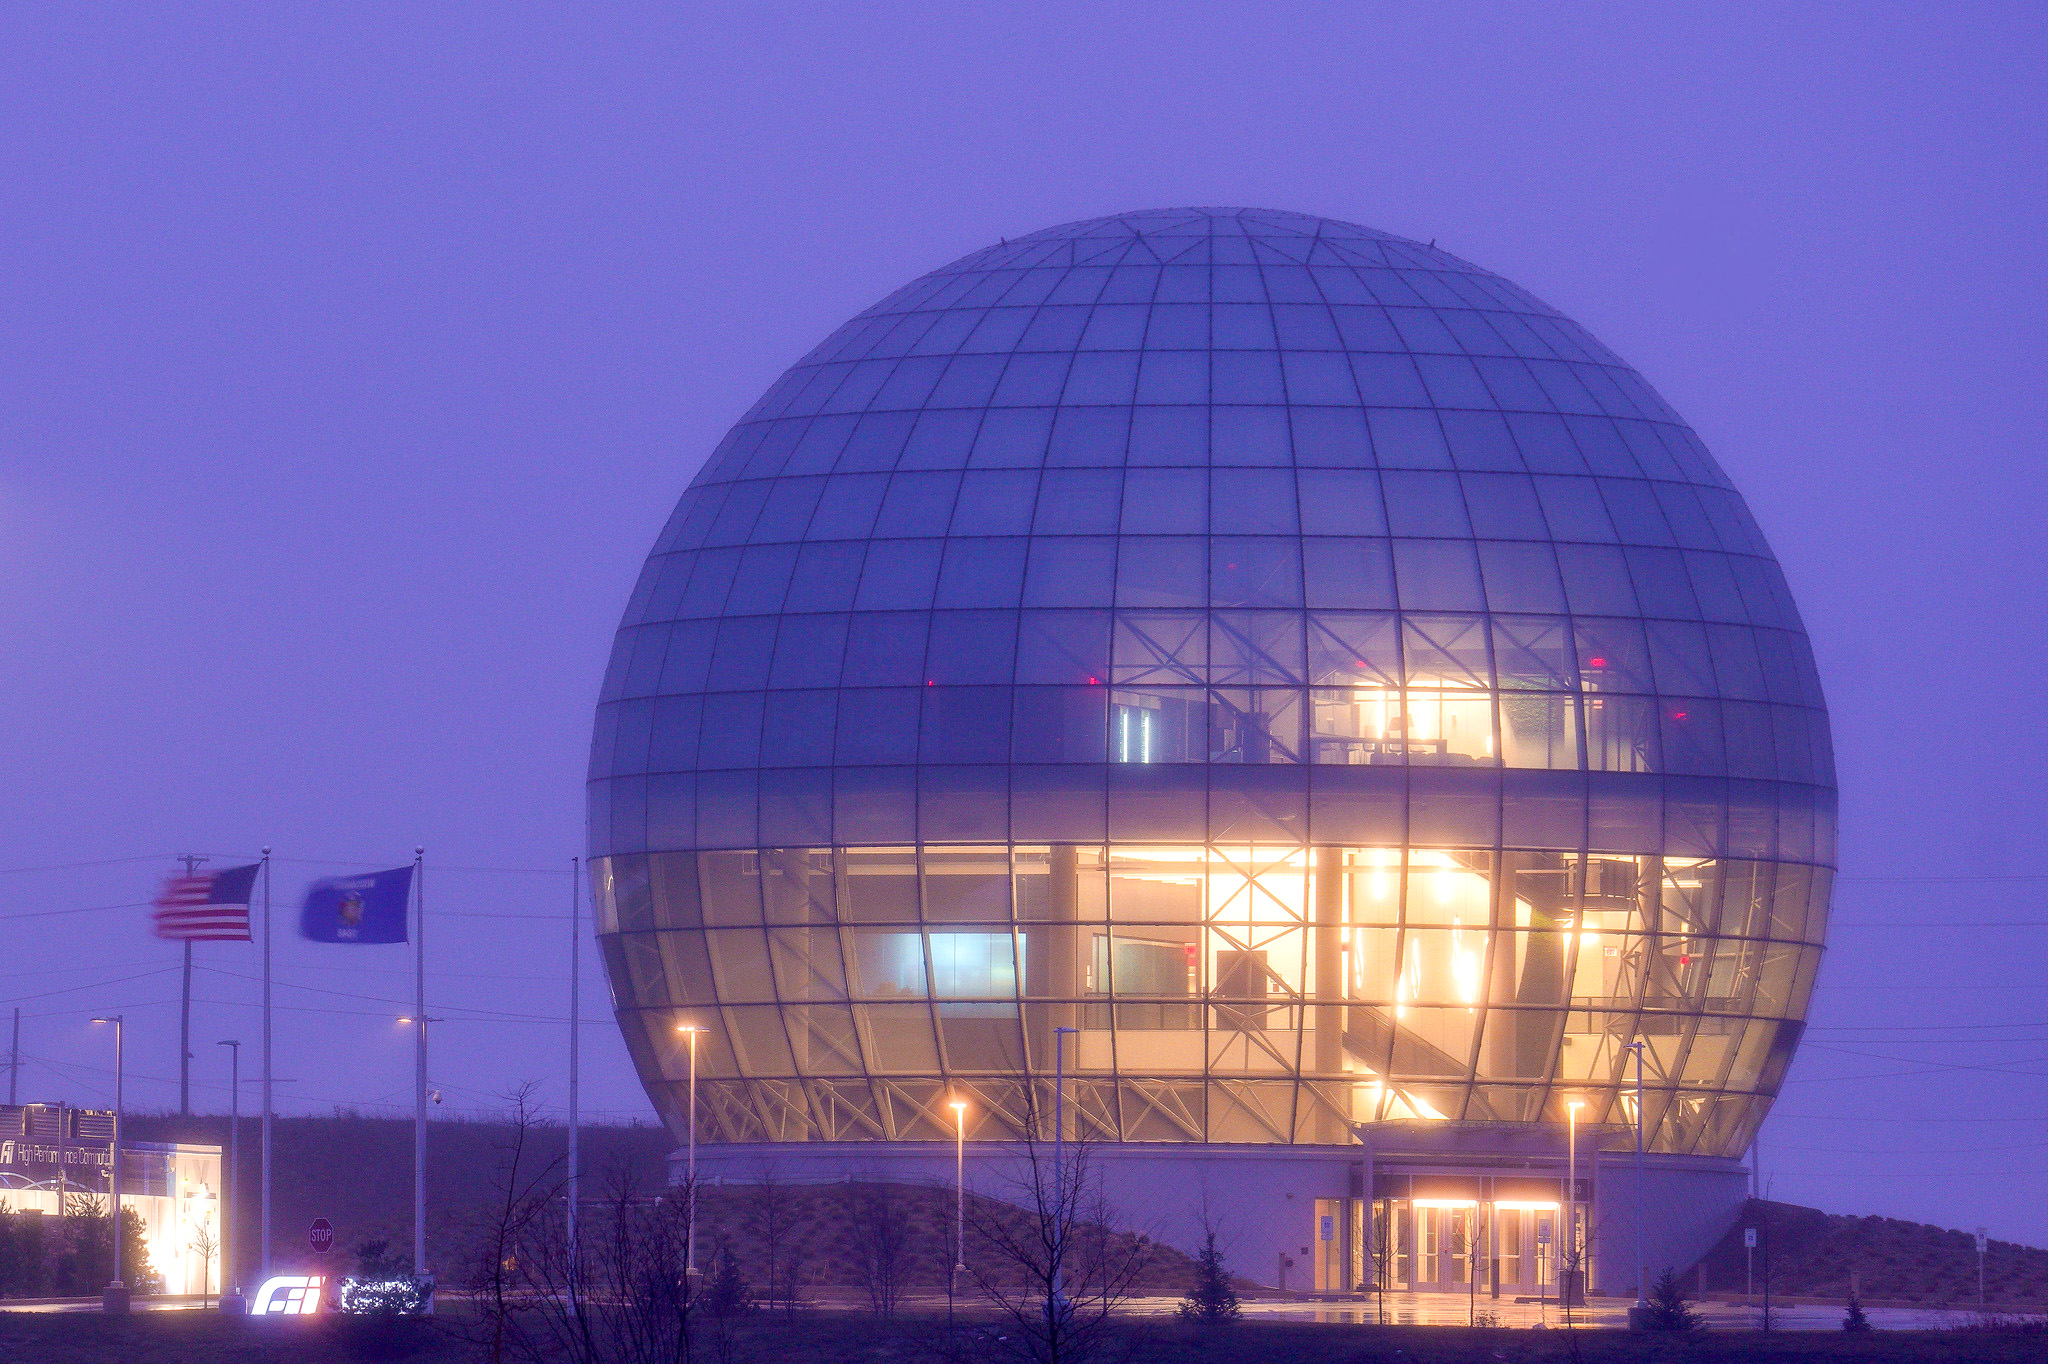 A giant glass orb of a building glows in an indigo sky as the sun sets.